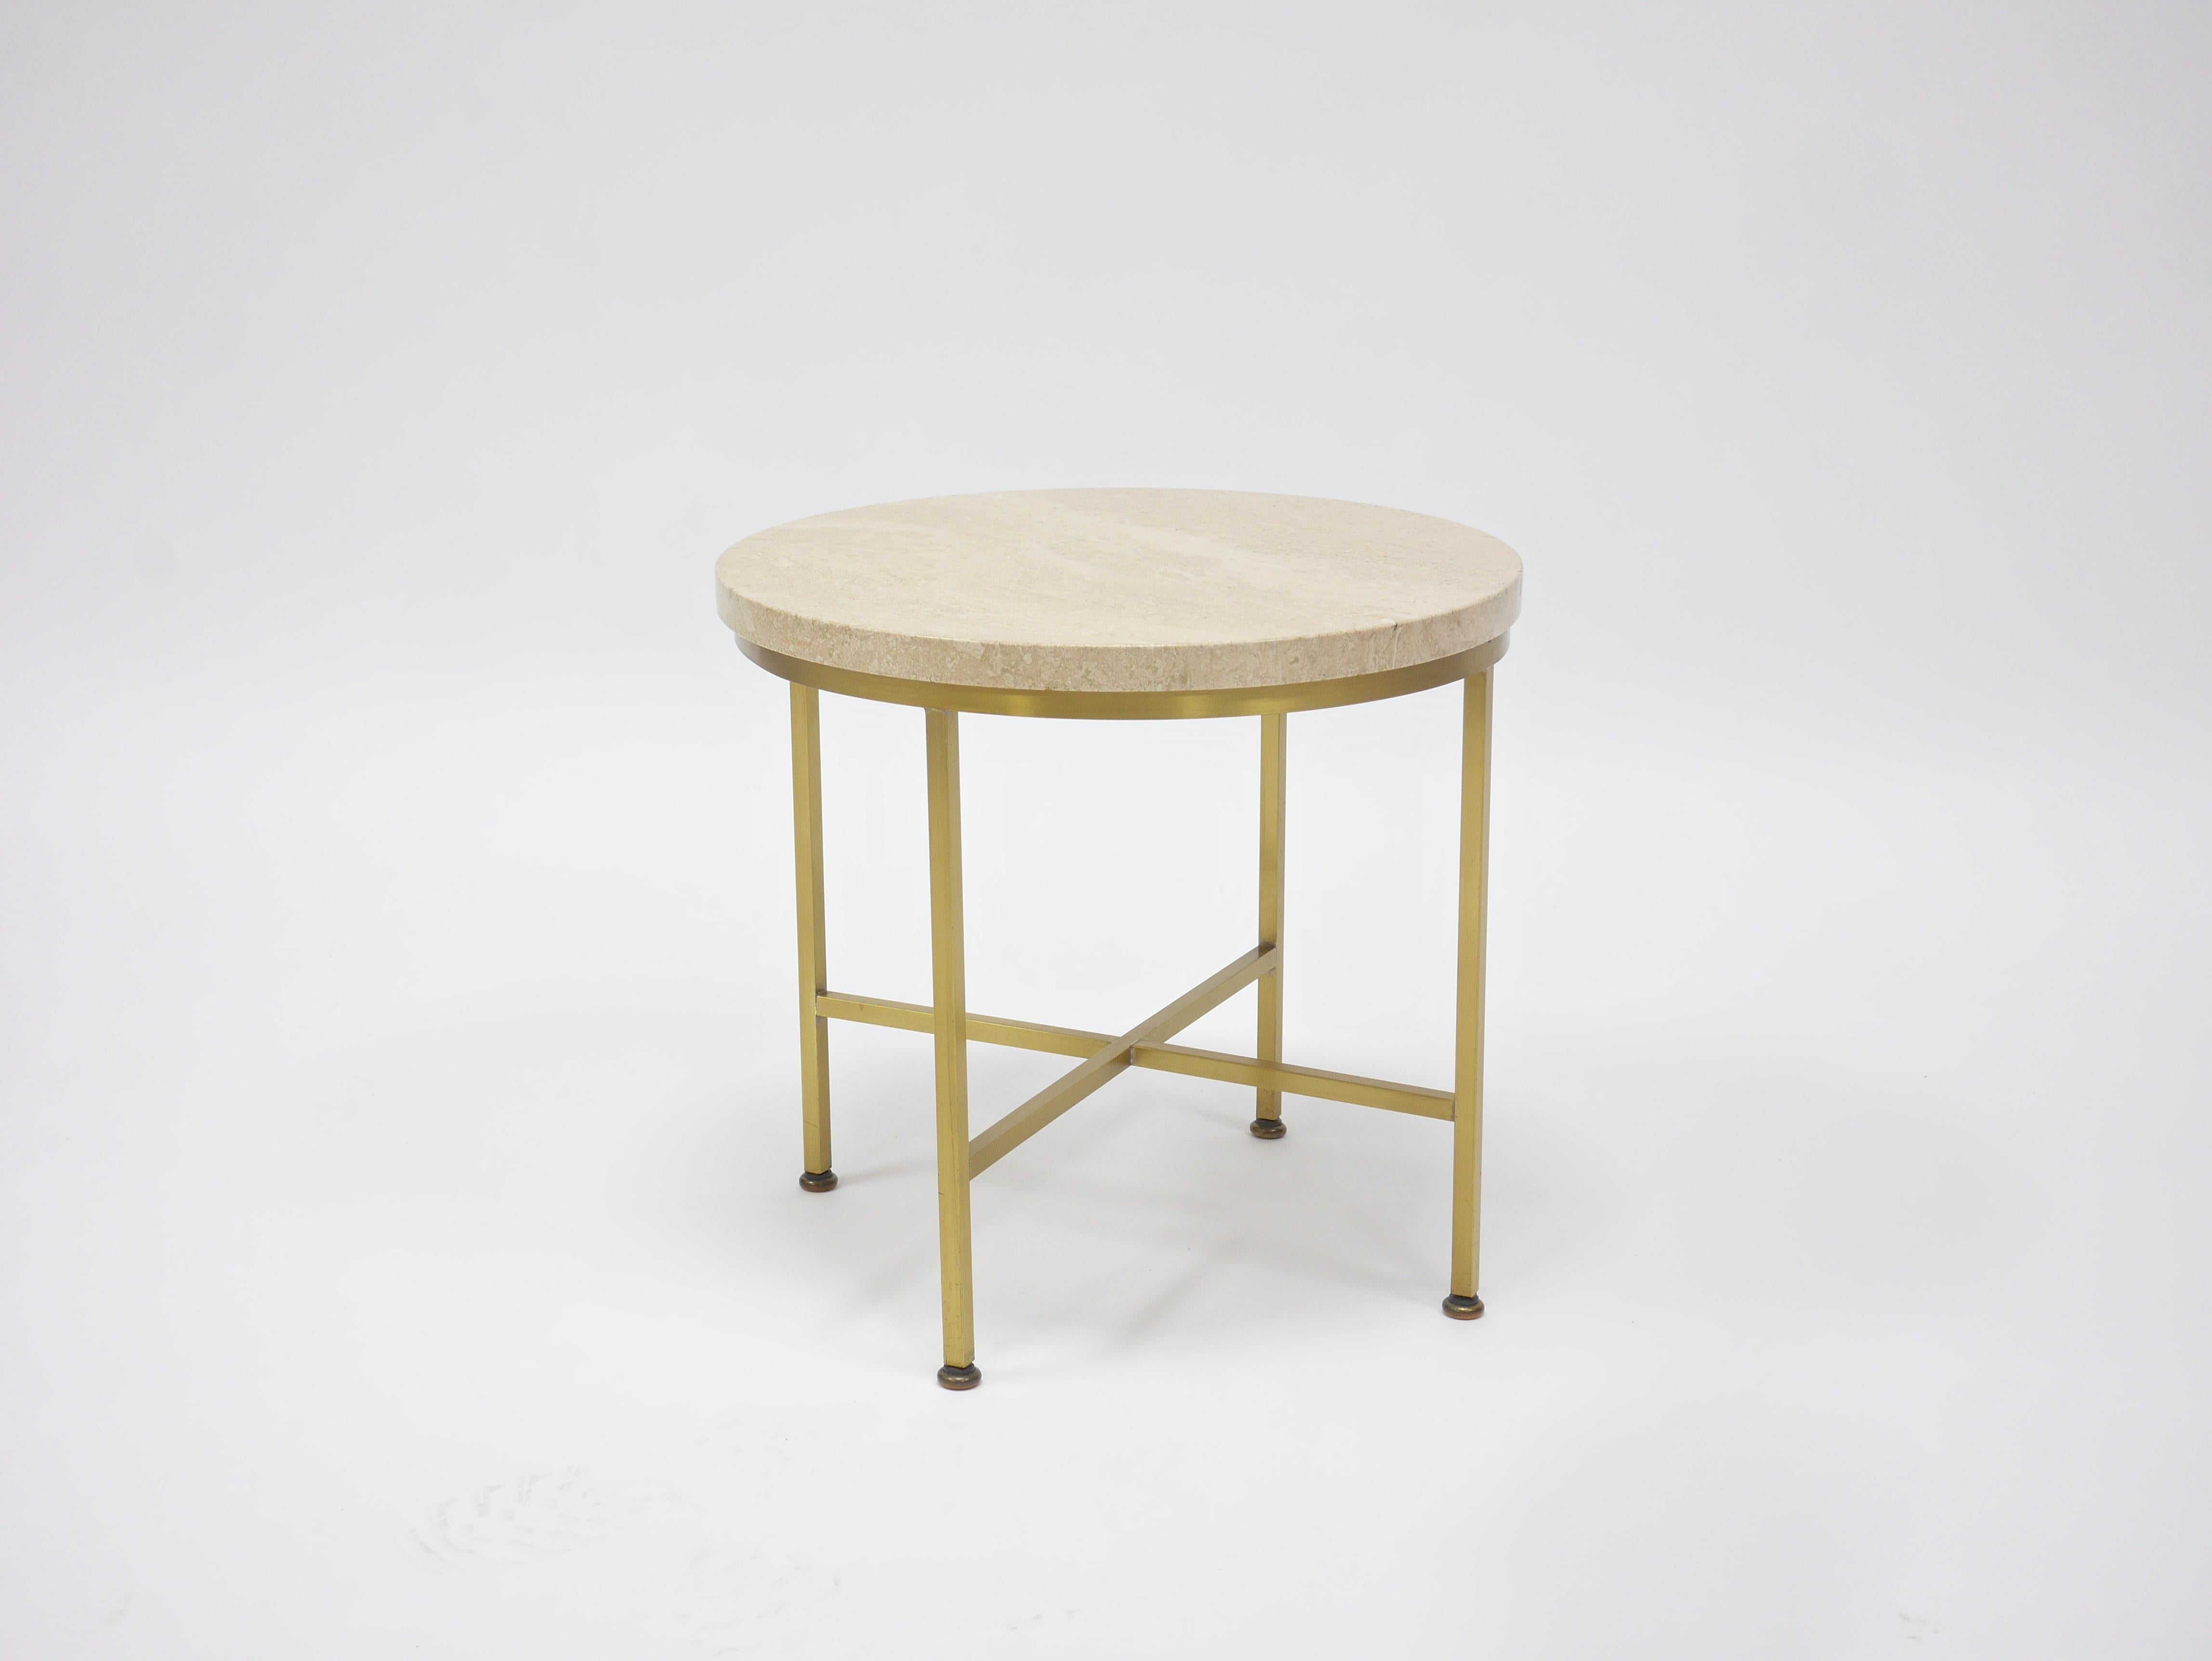 Rare to market, brass and vitrolite cigarette table by Paul McCobb for Directional. Excellent original light patina to brass frame, 3/4